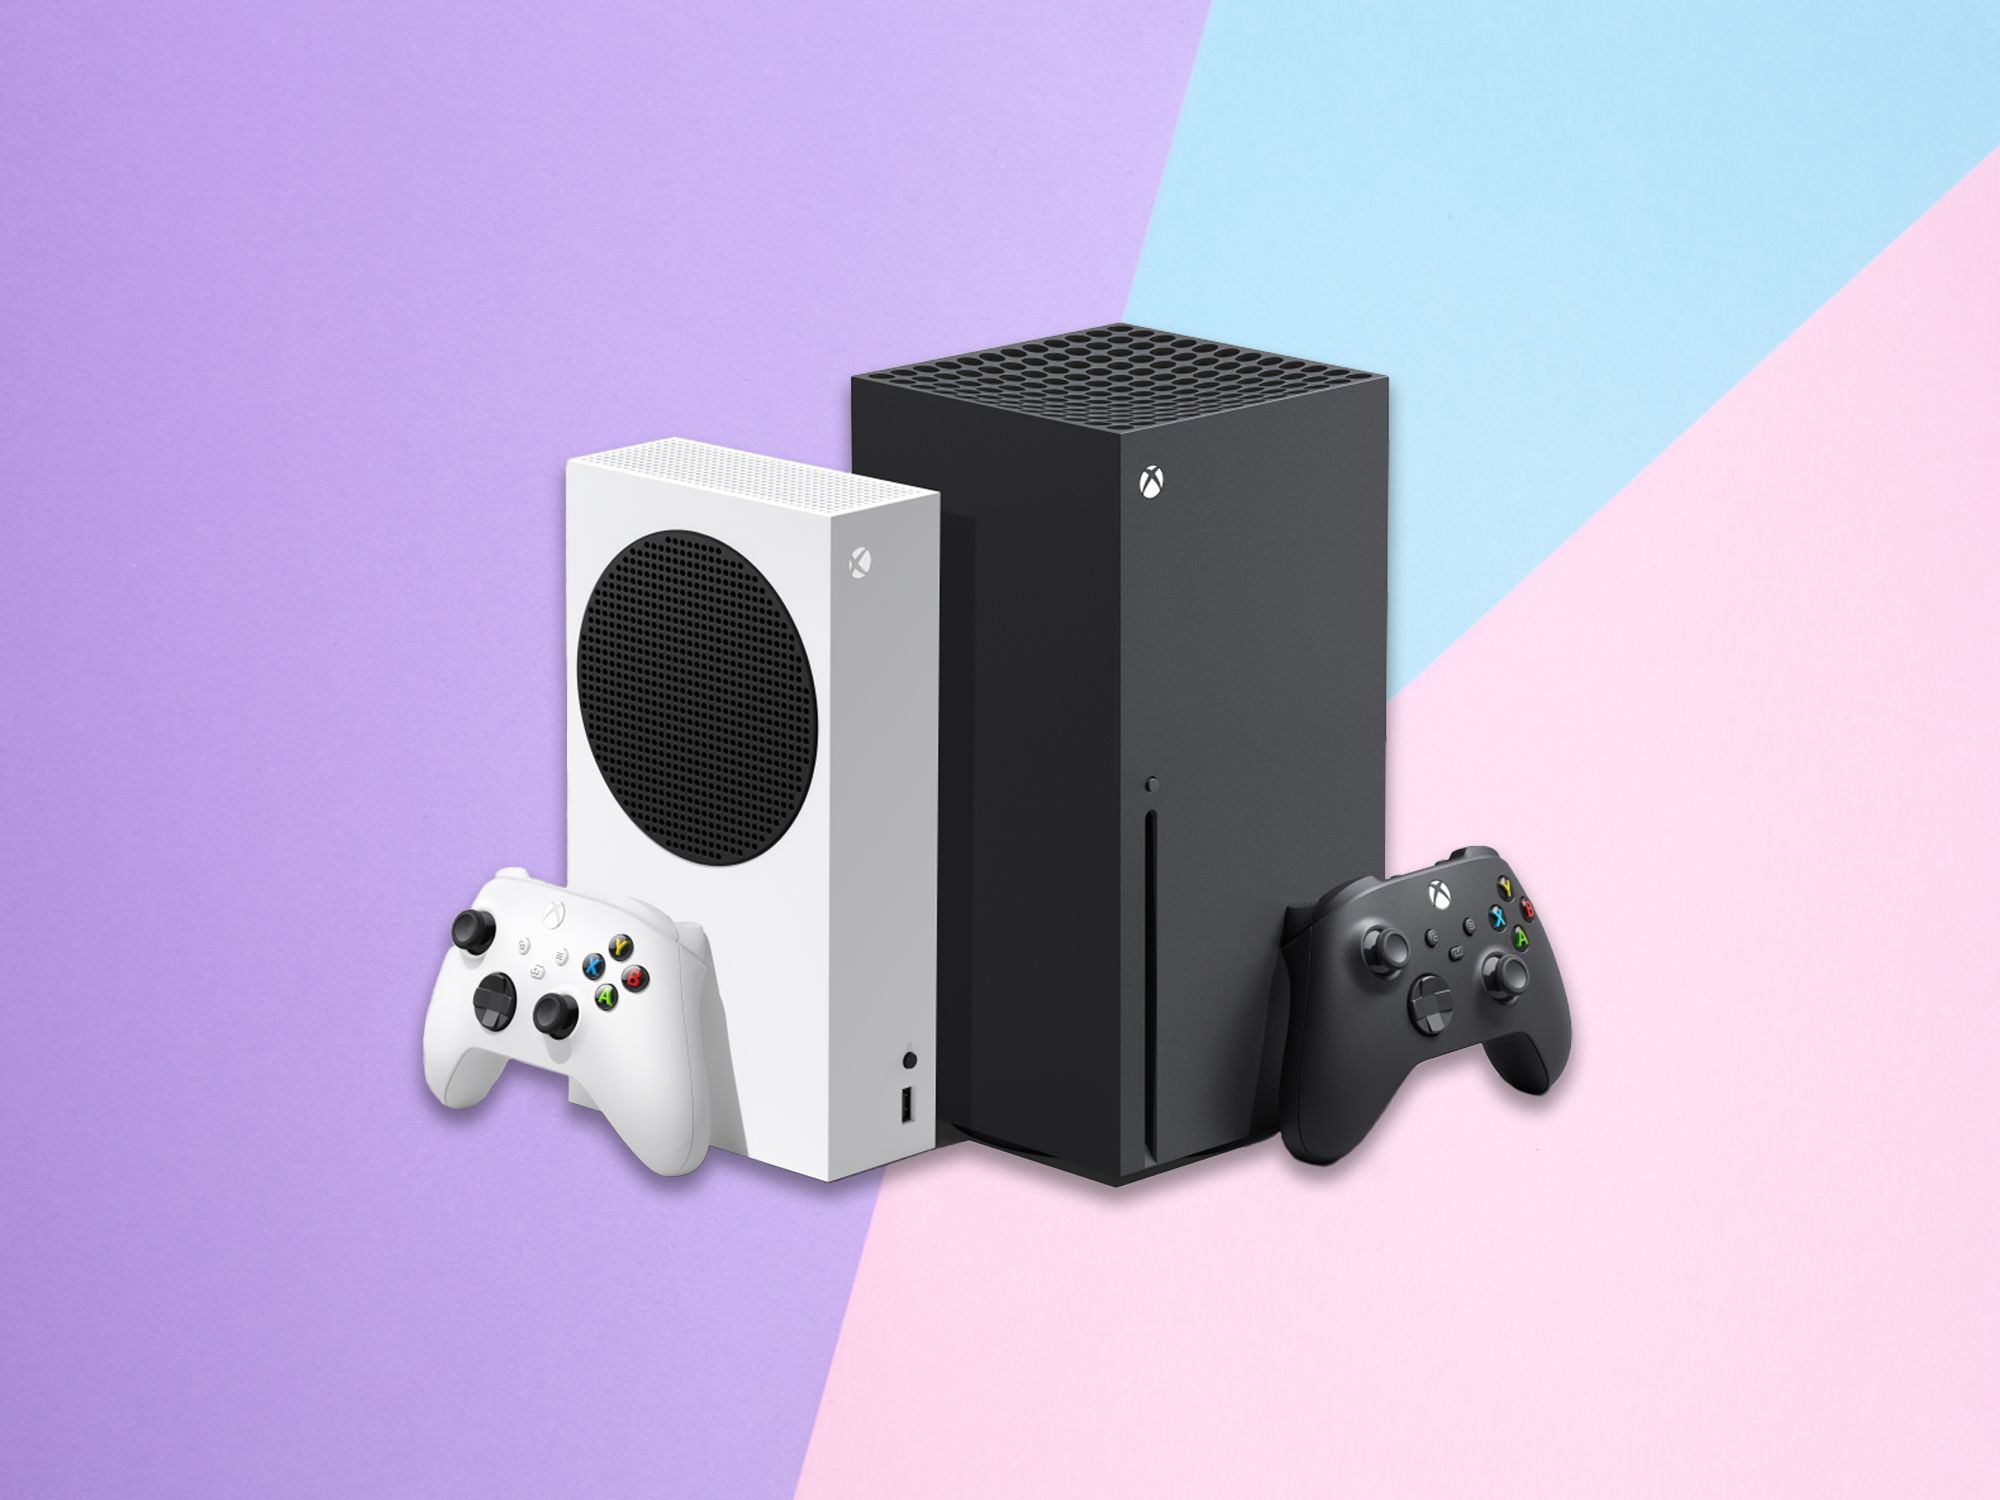 Save 10% on all PS4, Xbox One and Switch console bundles at